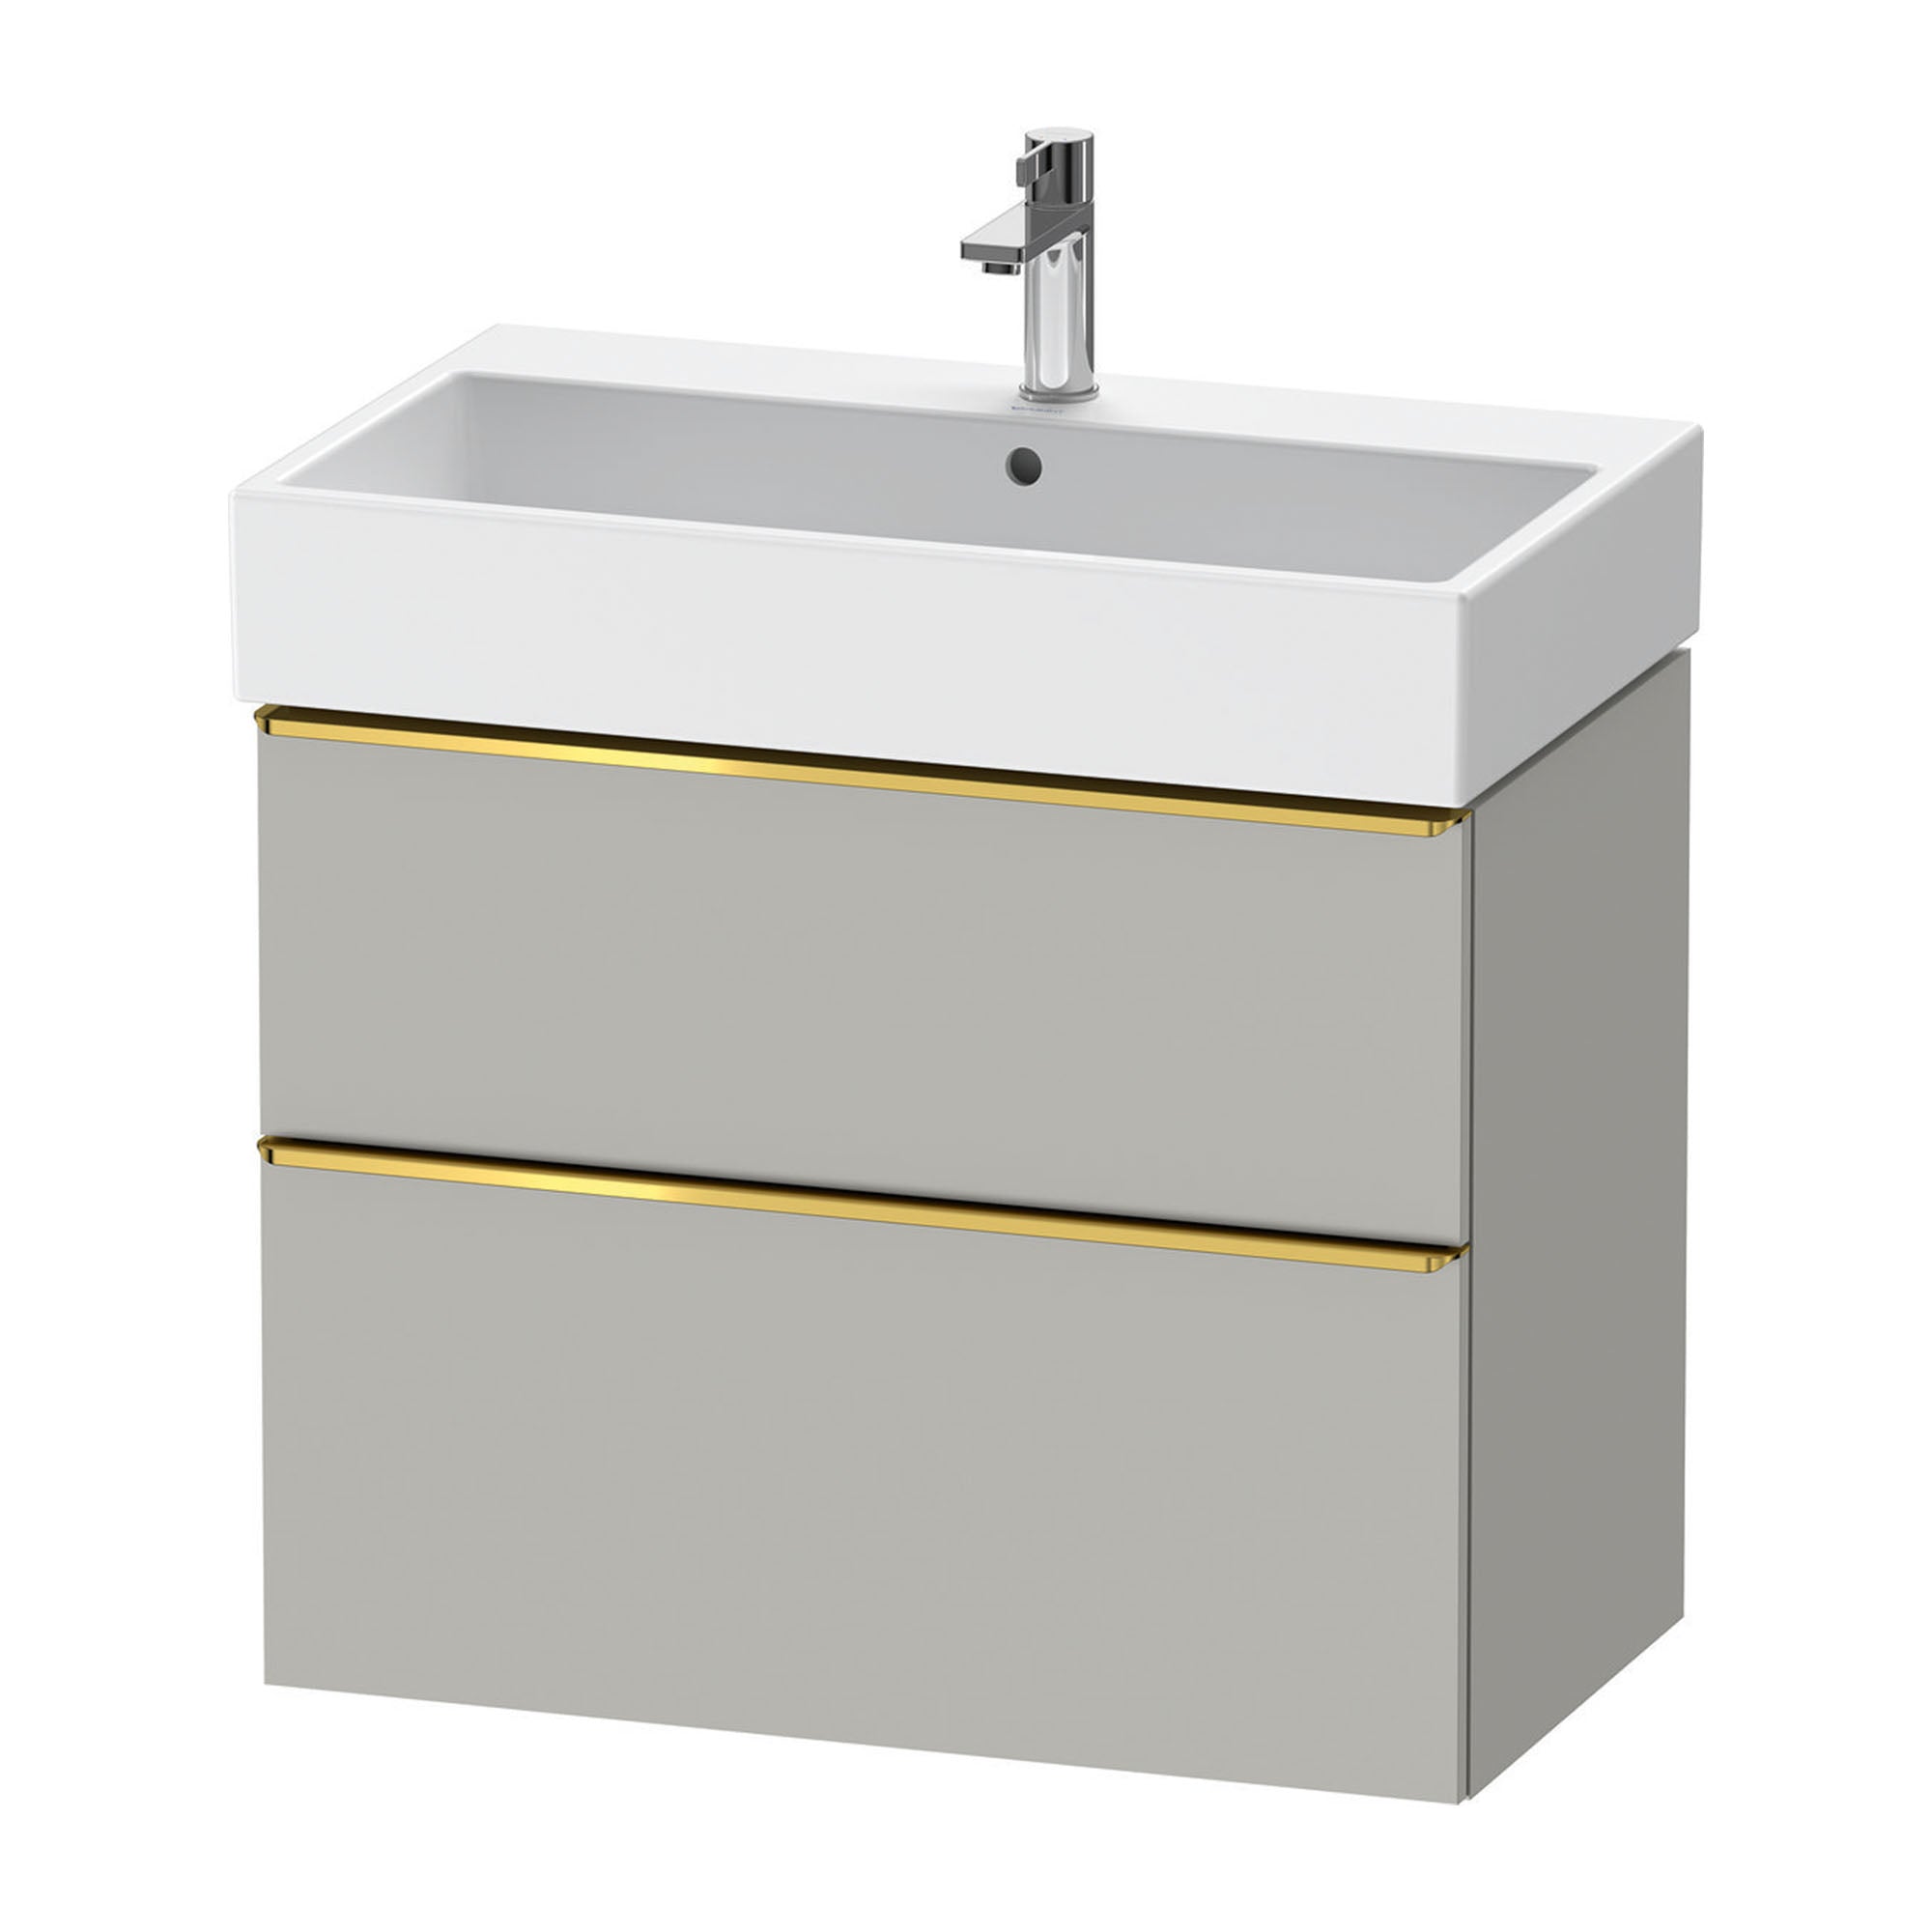 duravit d-neo 800 wall mounted vanity-unit with vero basin concrete grey gold handles